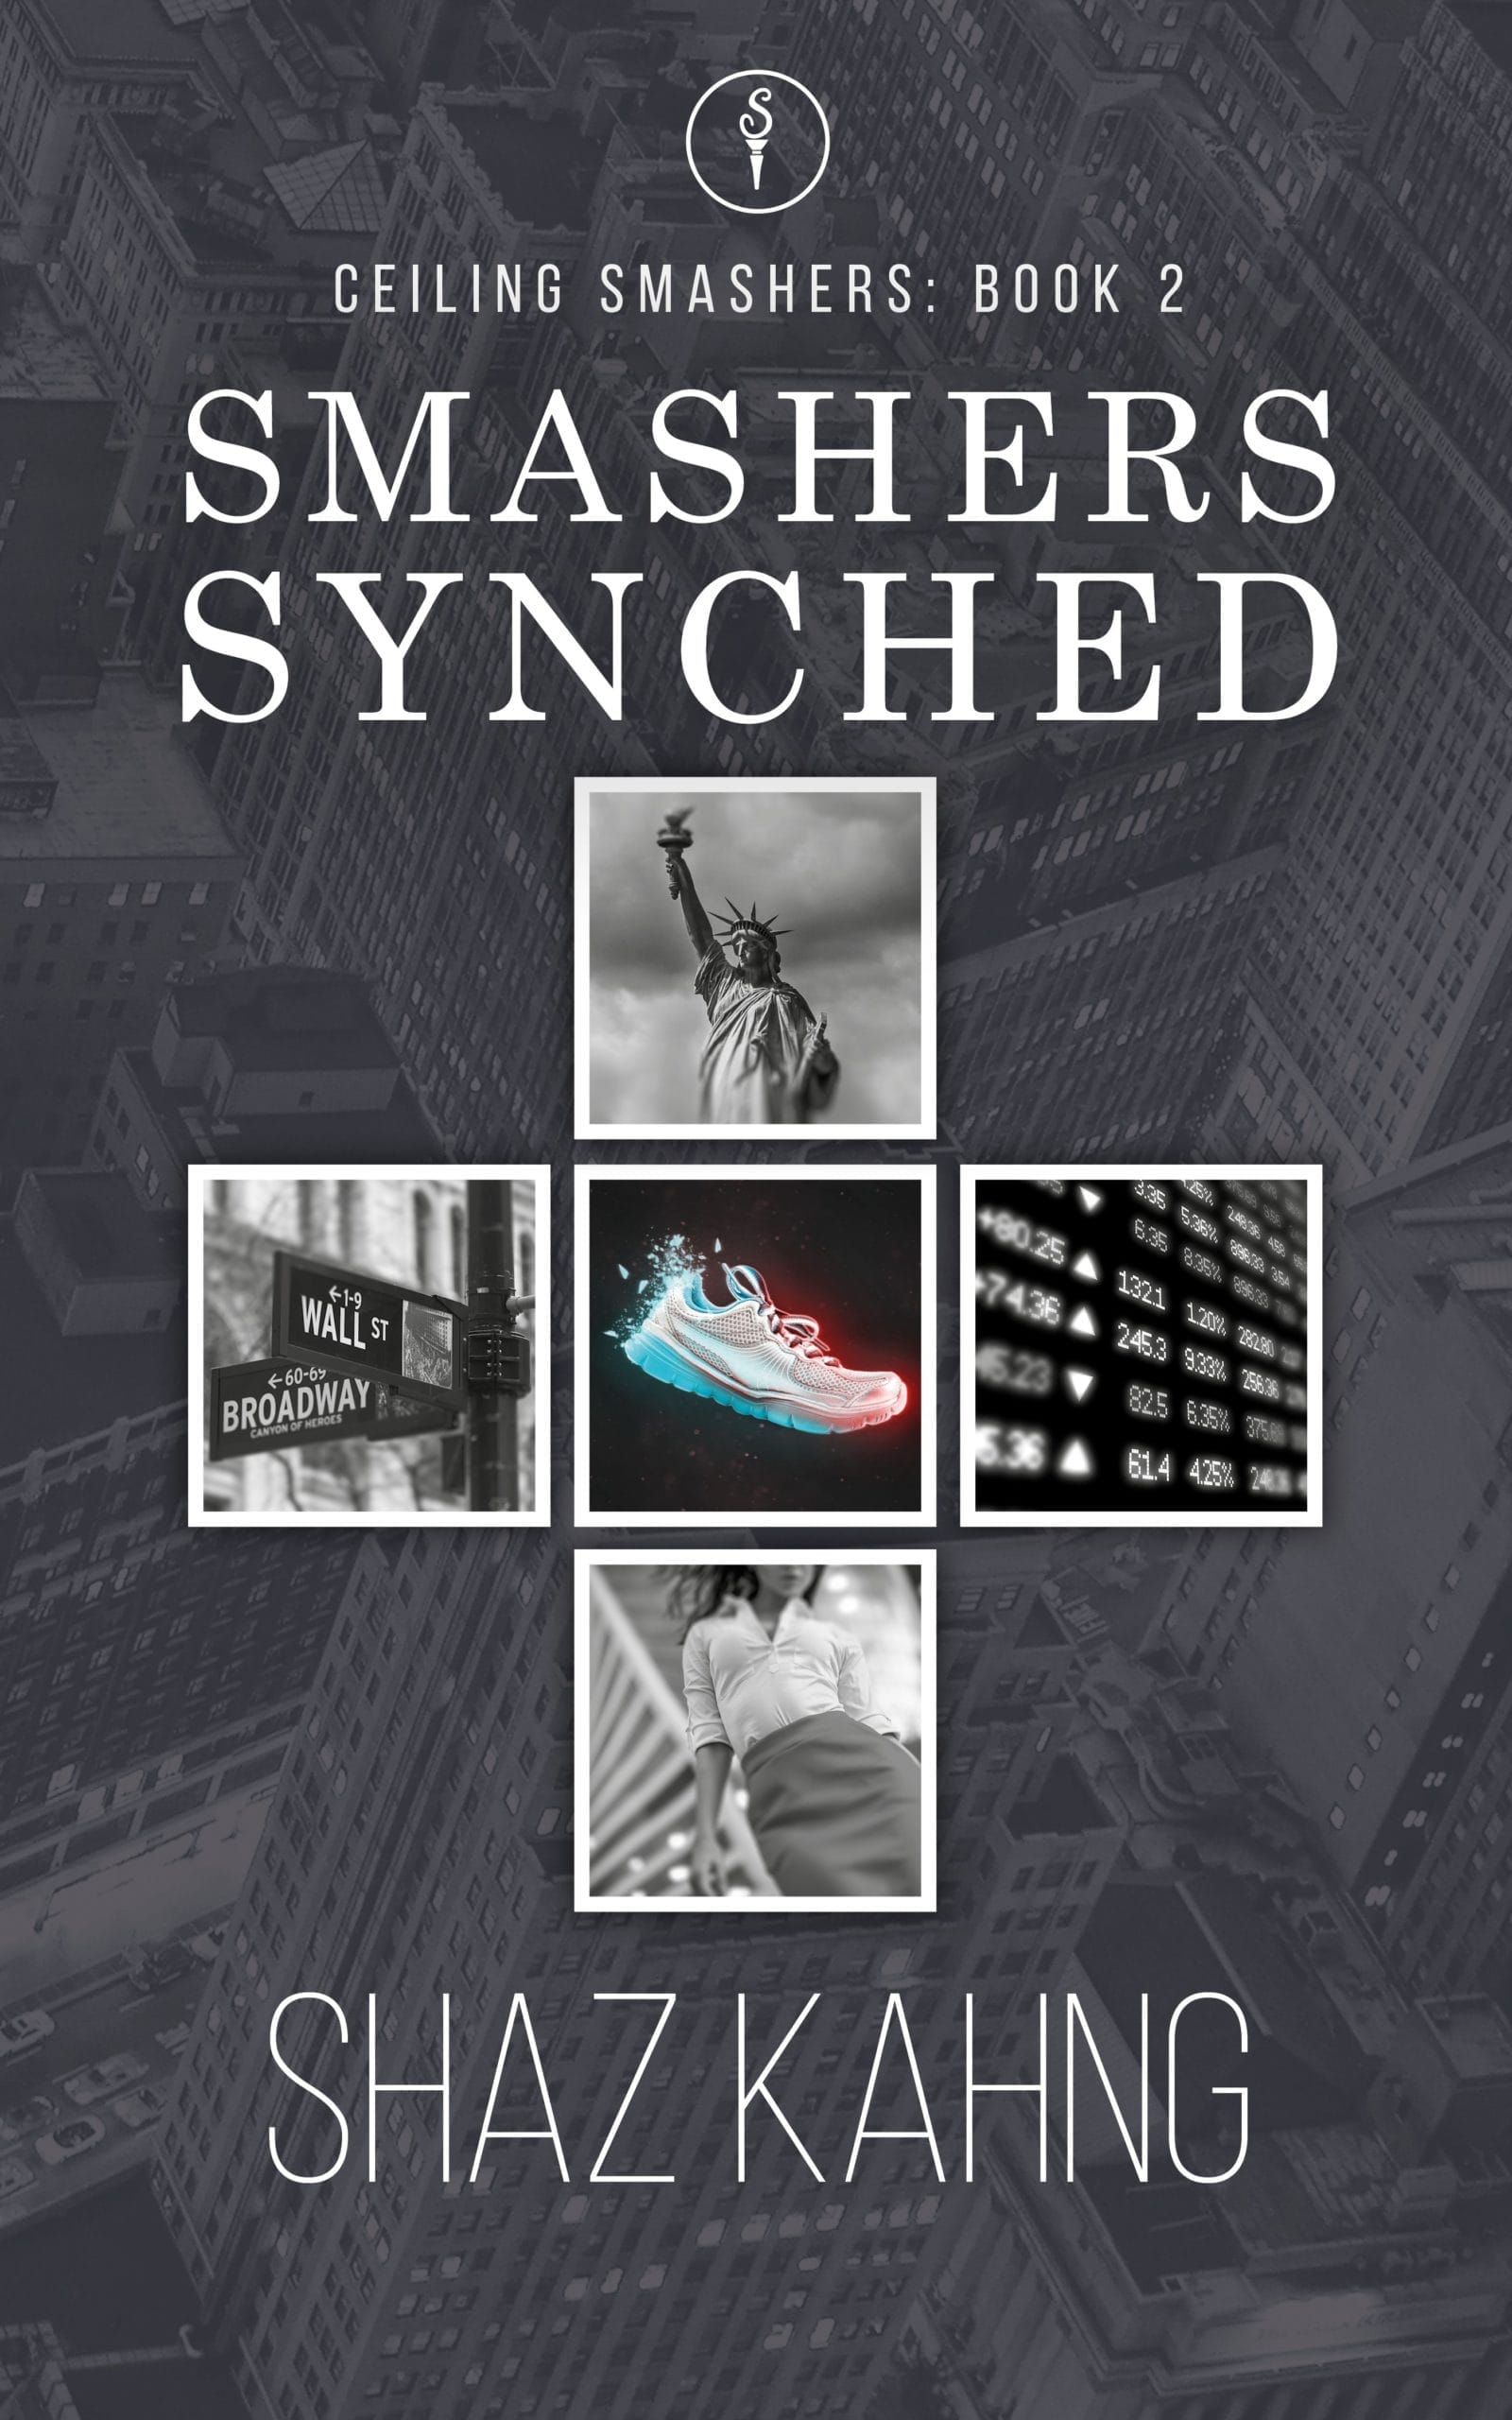 Book titled Smashers Synched